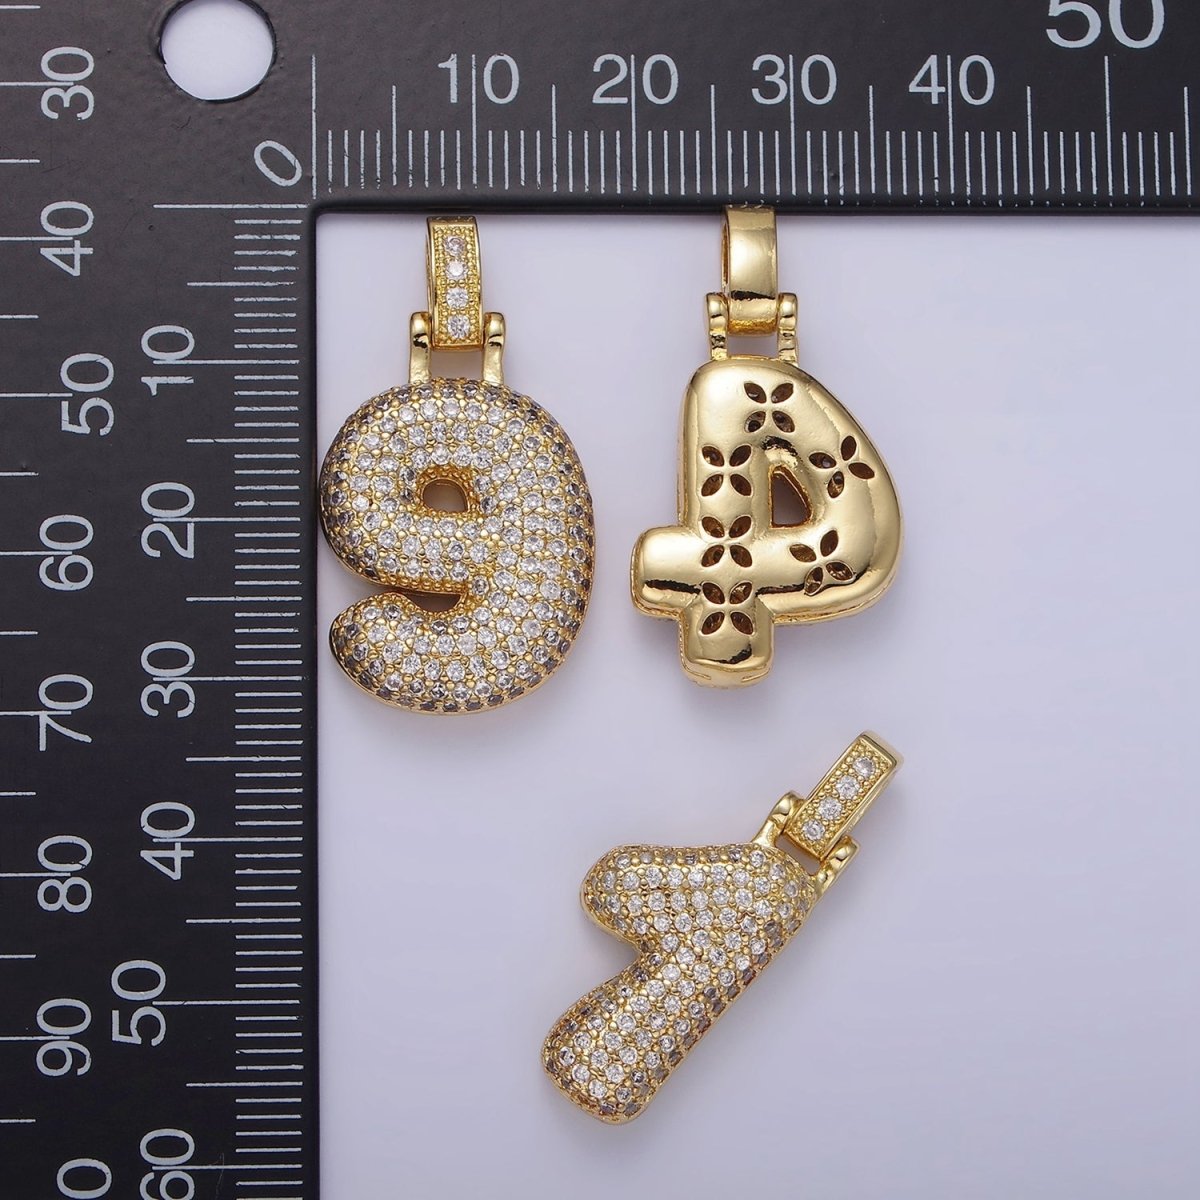 14K Gold Filled 30mm Micro Paved Balloon Bubble Number Pendant | AA1321 - AA1326 - DLUXCA